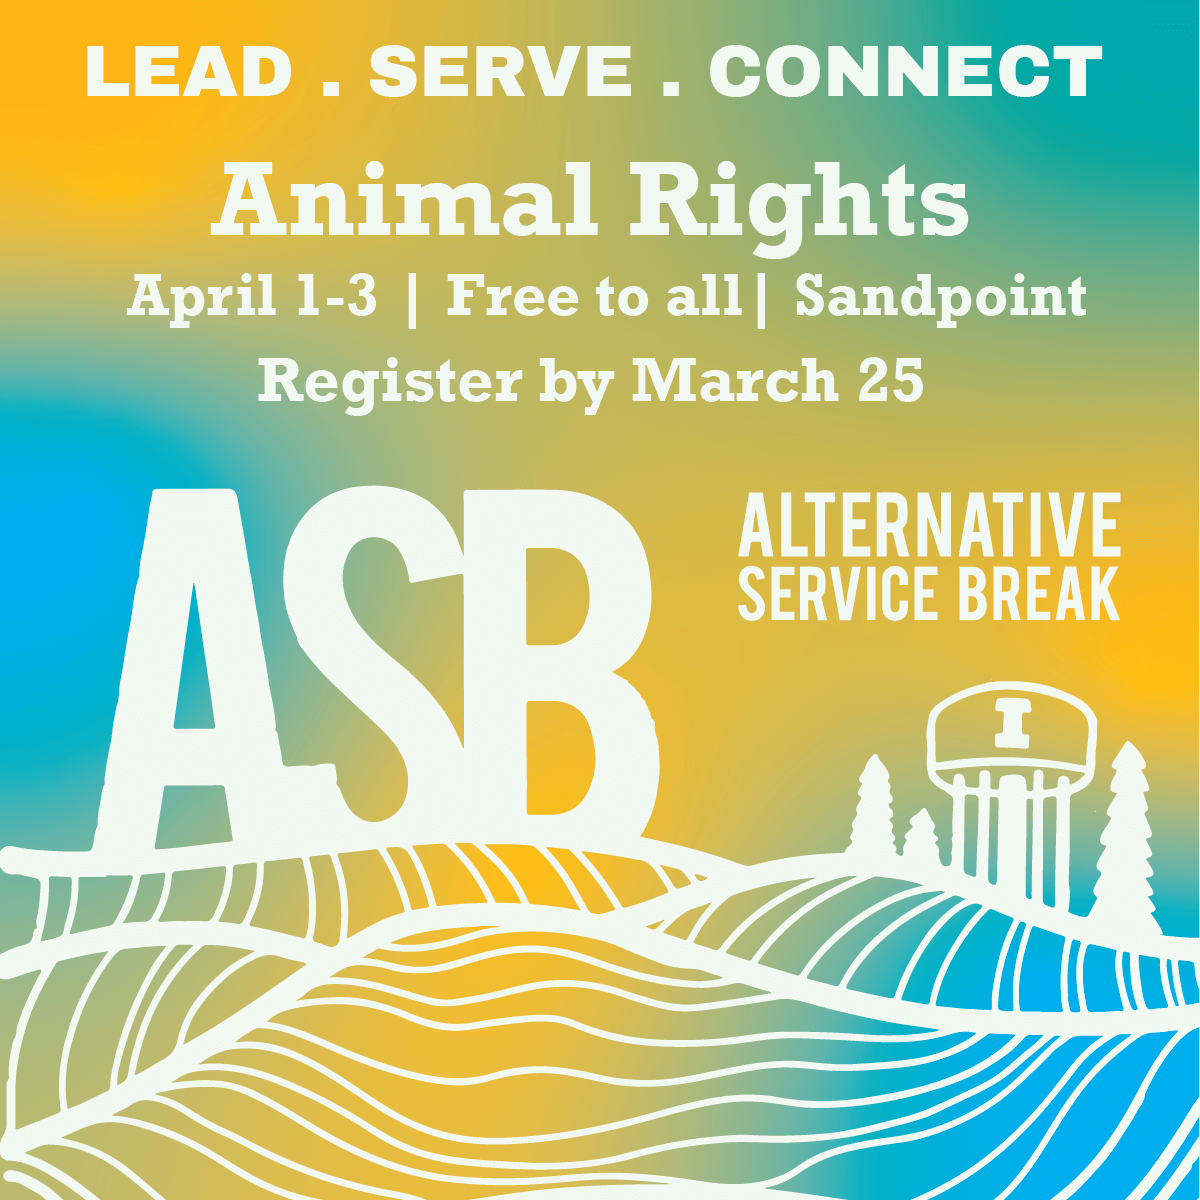 Join ASB on a Animal Rights Weekend Trip in March 2022.